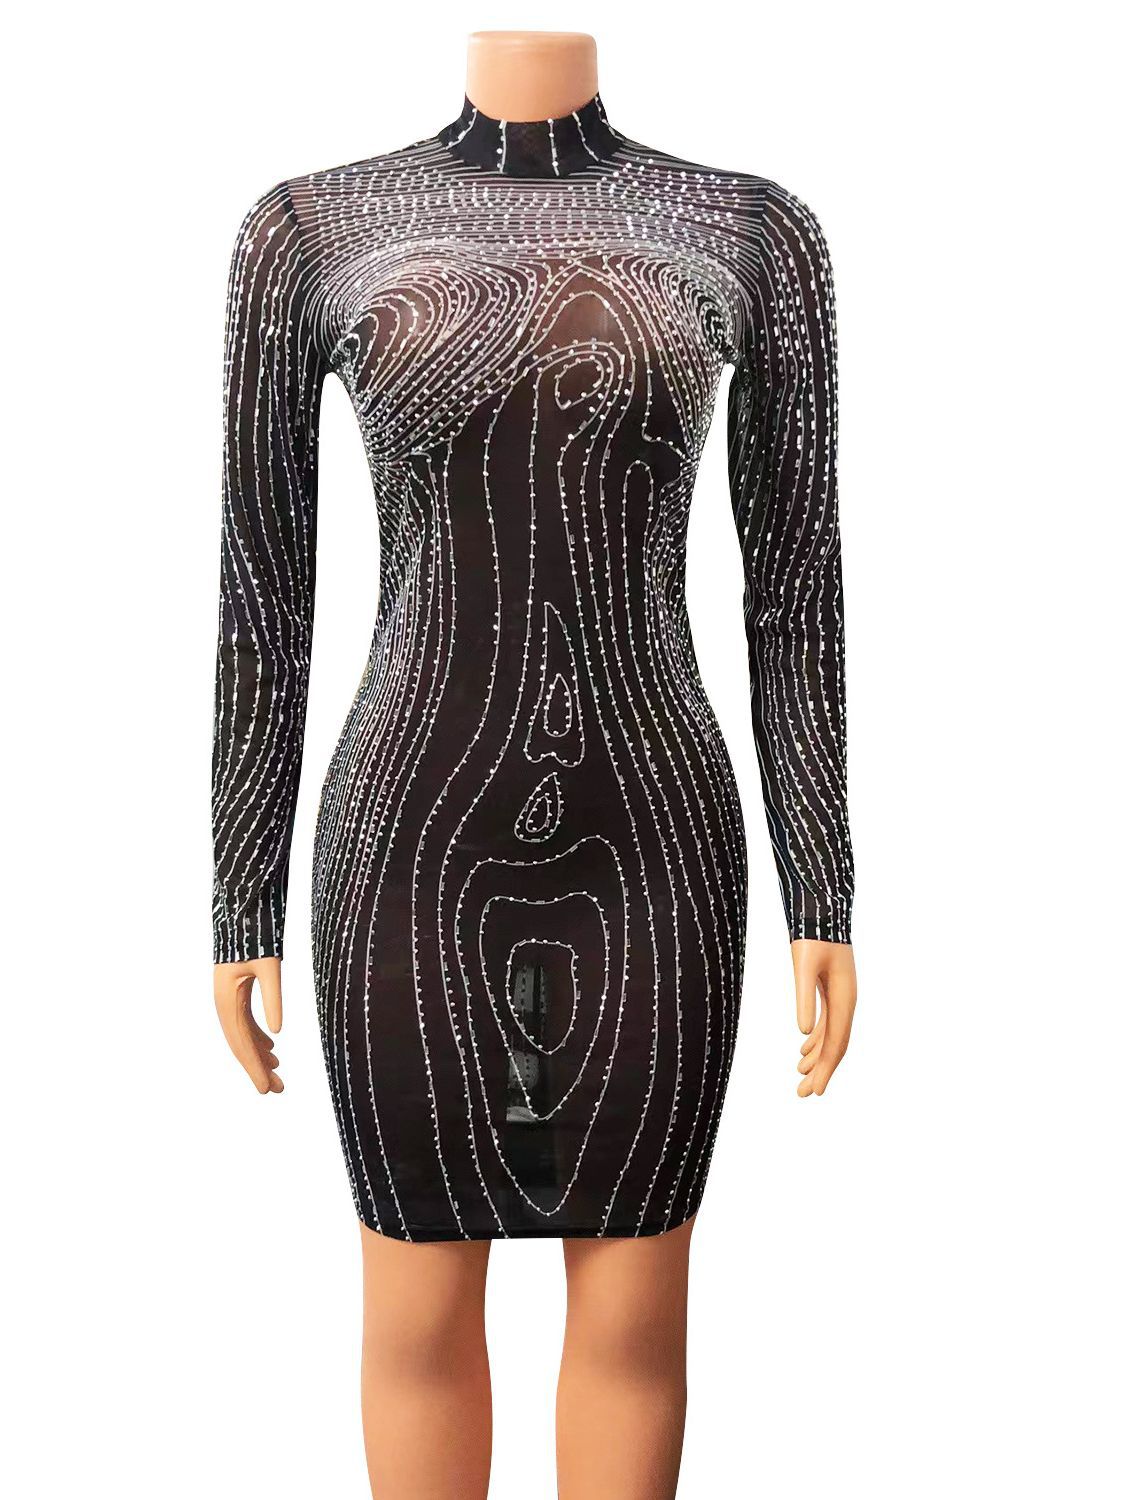 BamBam Summer Women's Sexy Tight Fitting Mesh Printed Beaded Dress For Women - BamBam Clothing Clothing